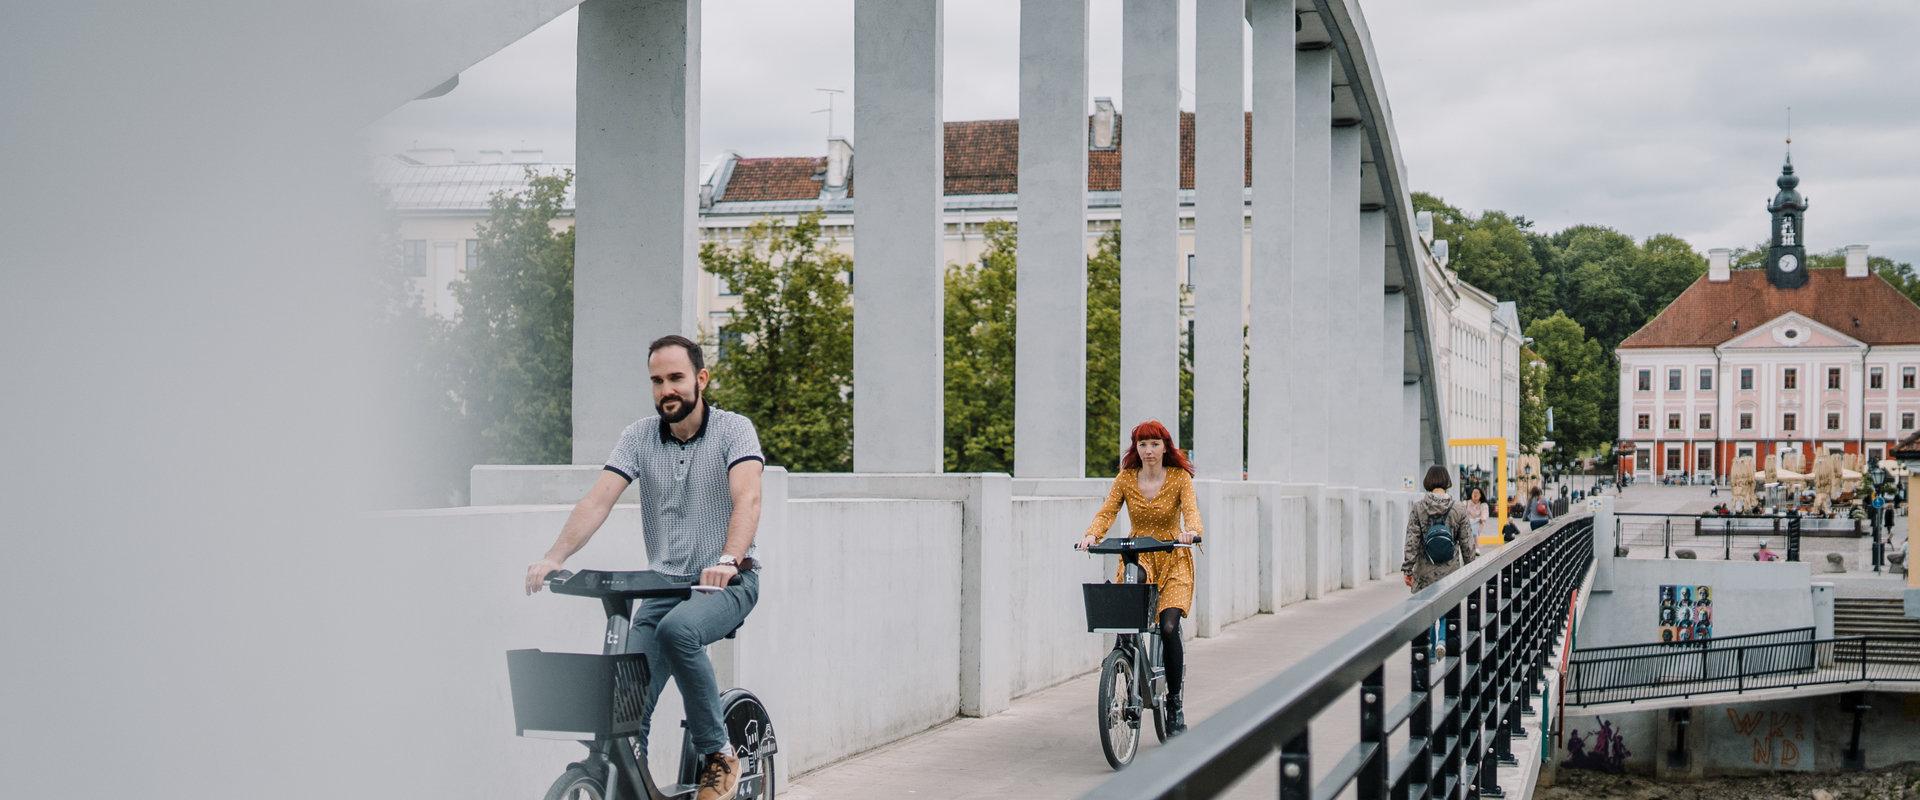 Arch Bridge in summer and young people riding bicycles of the Tartu bike sharing circuit